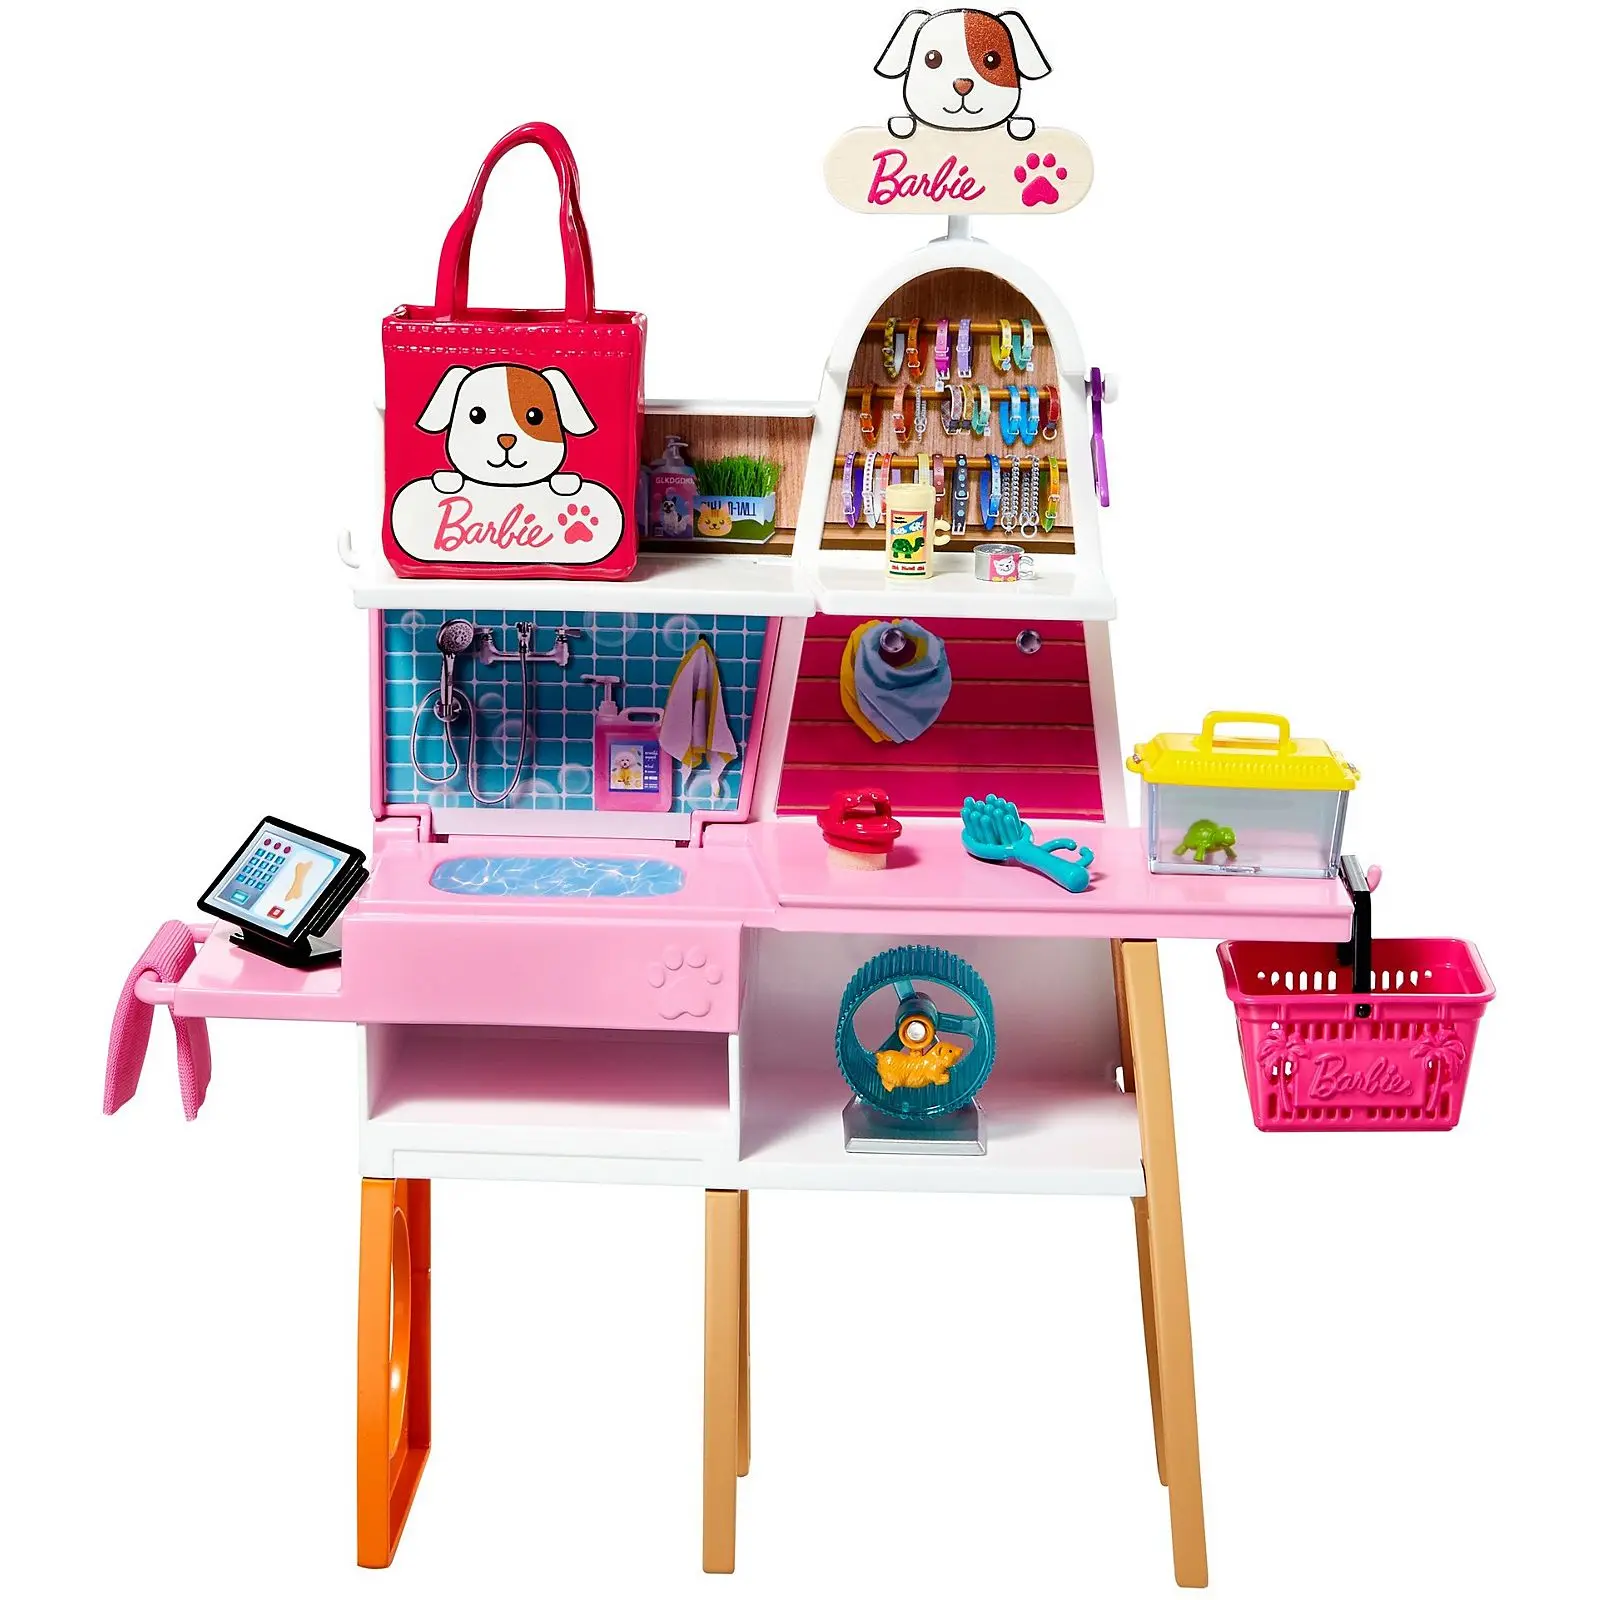 Pets Shop Boutique Playset Career Experience Girls Dolls Full Set Toys for Children with Barbie Accessories Dream House